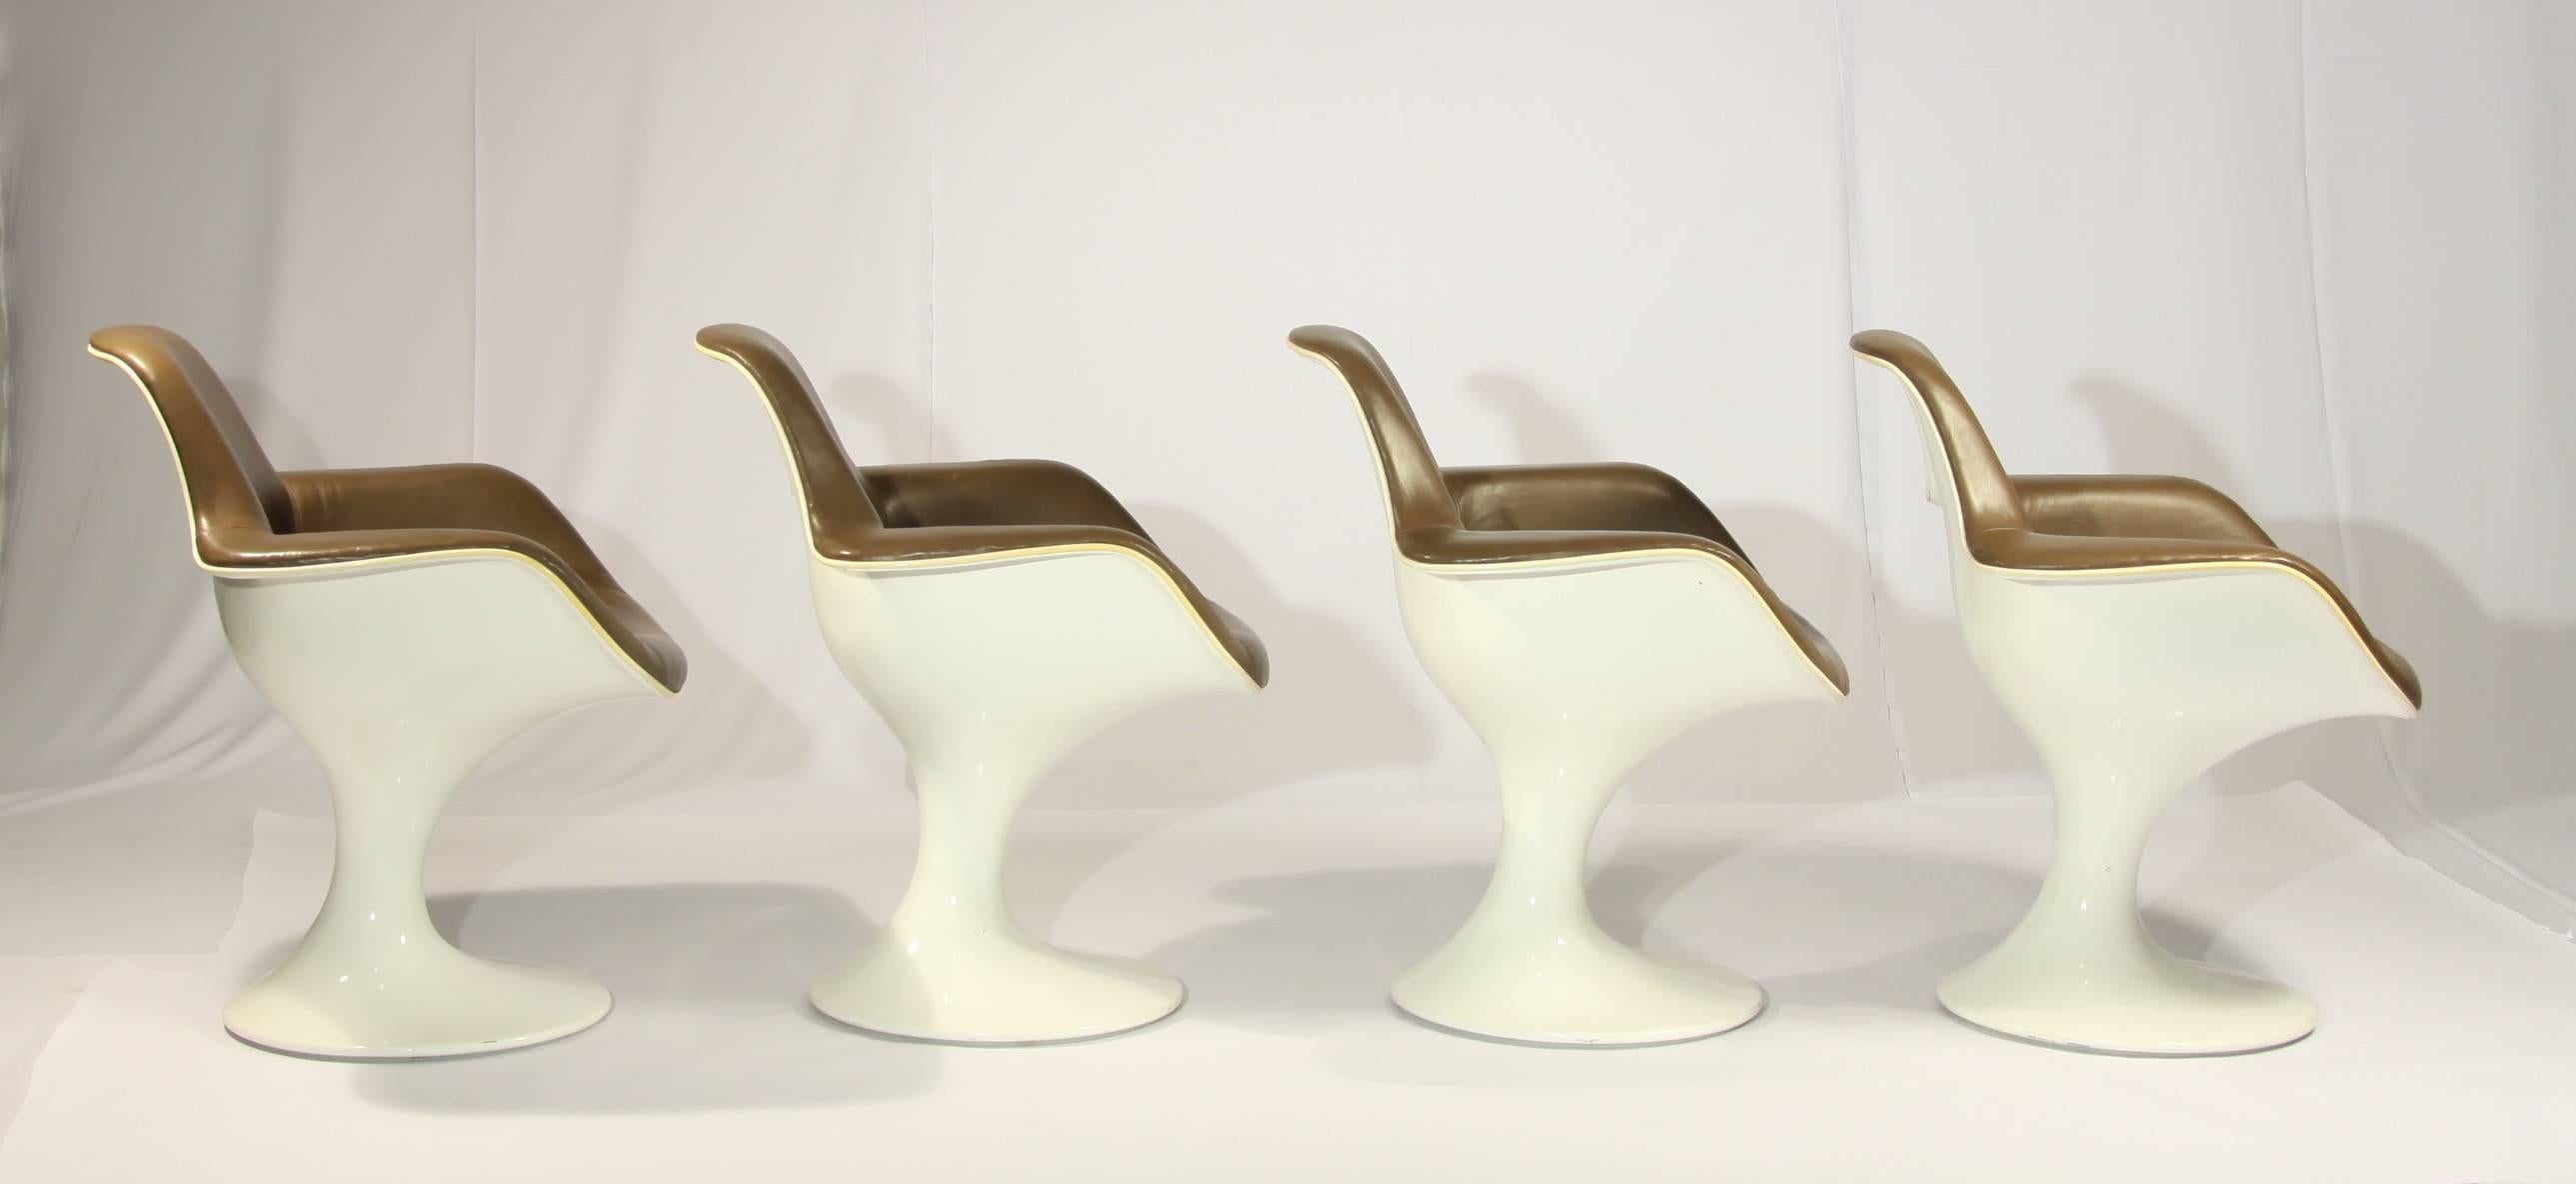 This model Orbit sitting group of four chairs was designed by Markus Farner and Walter Grunder, circa 1970, and was produced by Herman Miller.
The white plastic chairs retain their original light brown leather fabric.